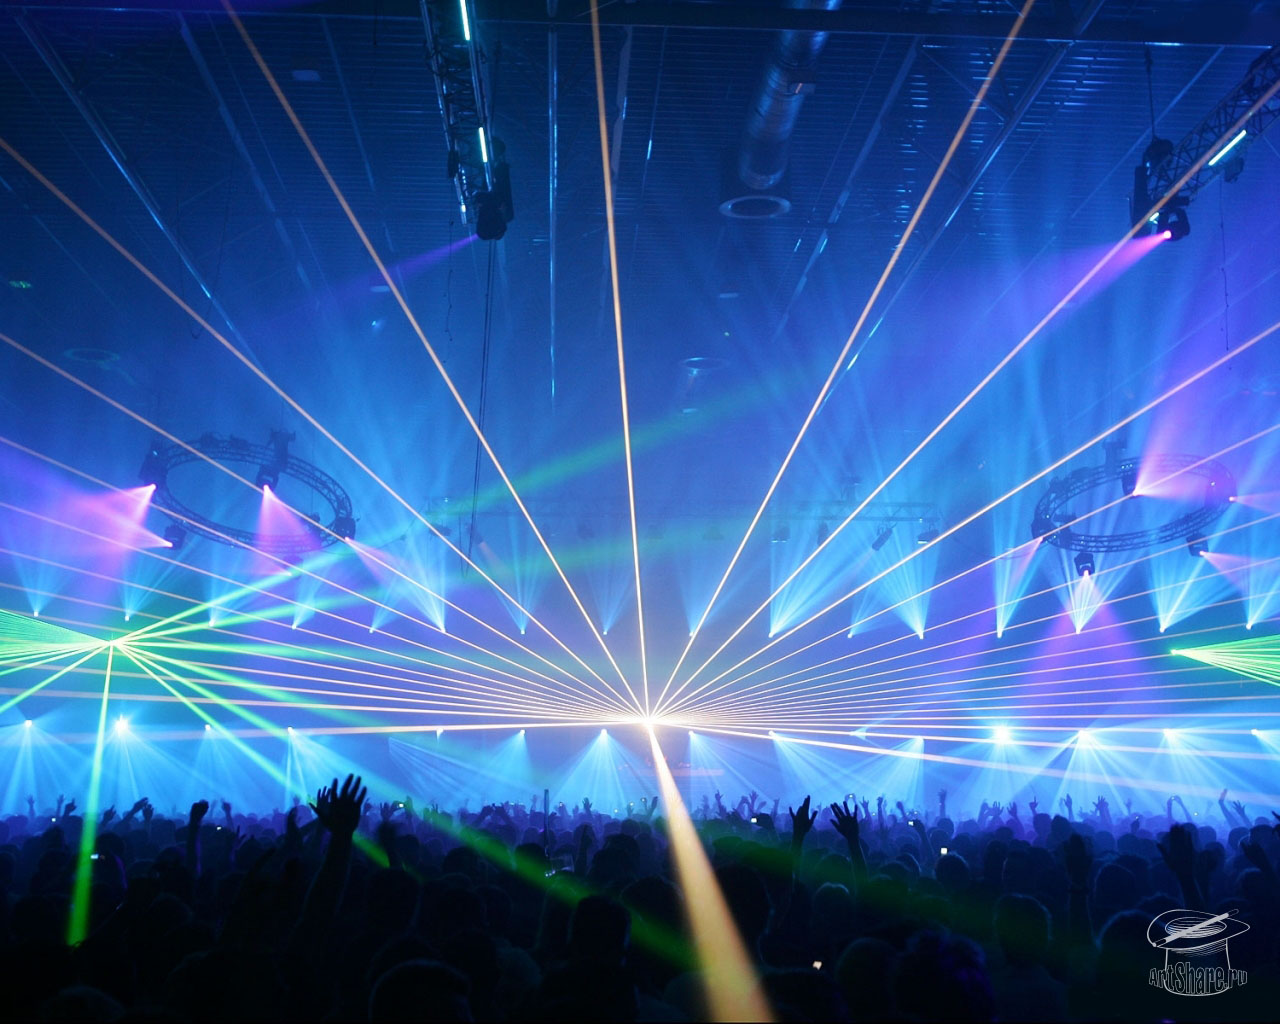 More awesome raves